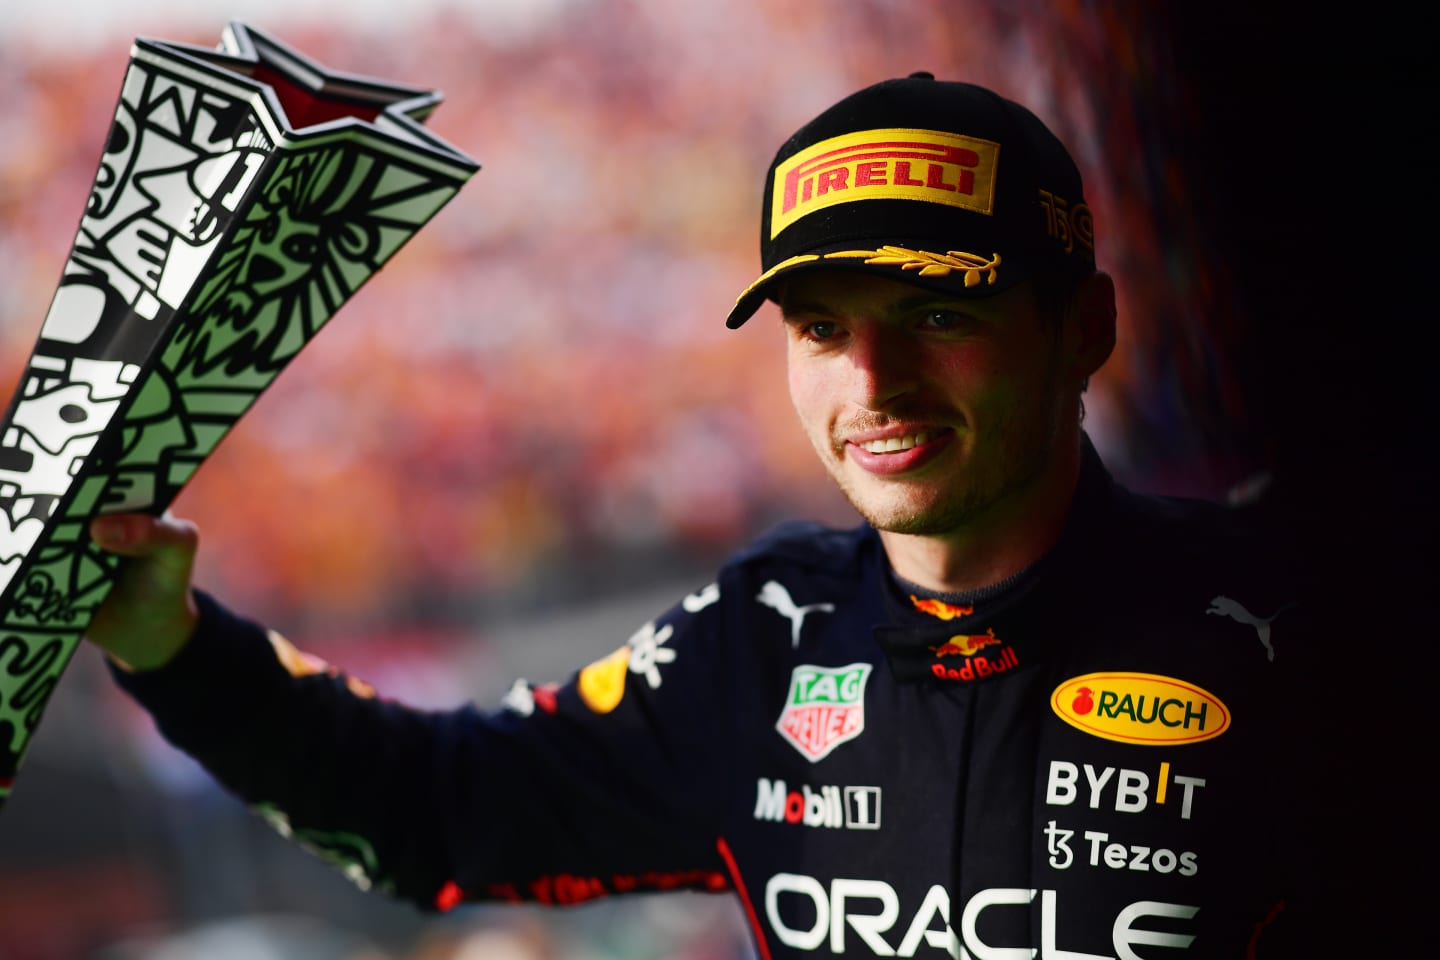 ZANDVOORT, NETHERLANDS - SEPTEMBER 04: Race winner Max Verstappen of the Netherlands and Oracle Red Bull Racing celebrates on the podium during the F1 Grand Prix of The Netherlands at Circuit Zandvoort on September 04, 2022 in Zandvoort, Netherlands. (Photo by Mario Renzi - Formula 1/Formula 1 via Getty Images)